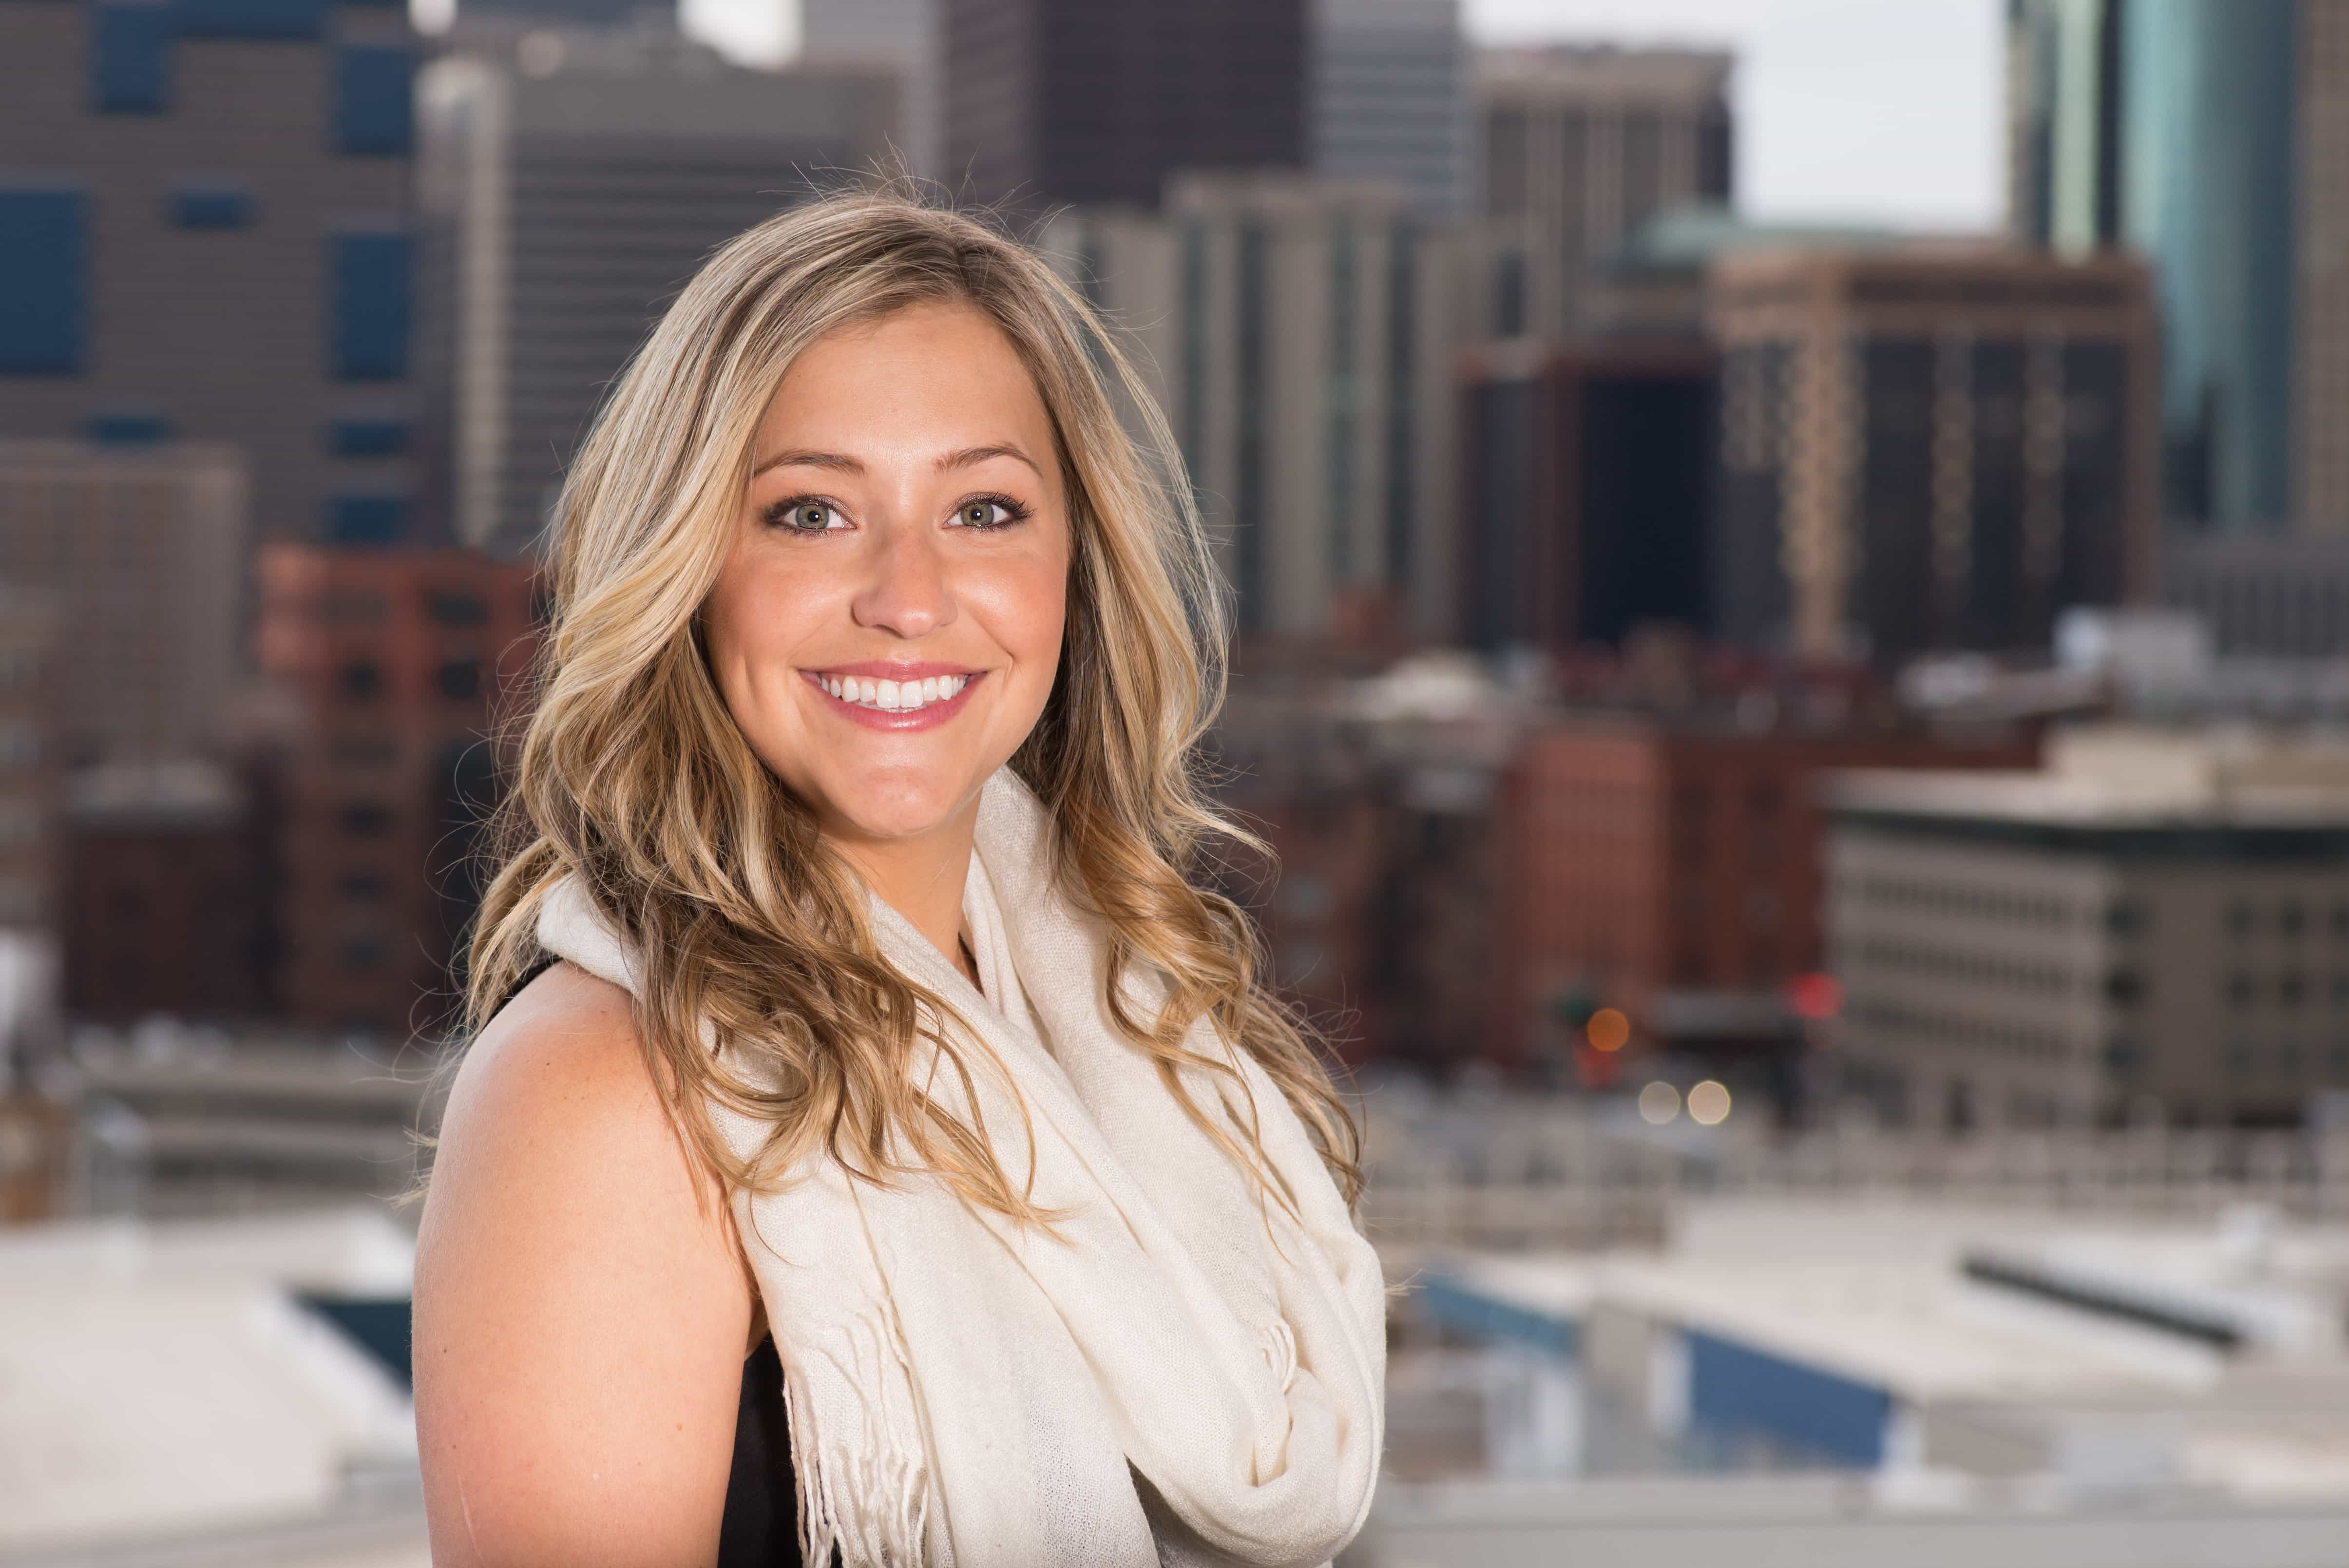 Professional realtor headshot with downtown denver in the background outdoors